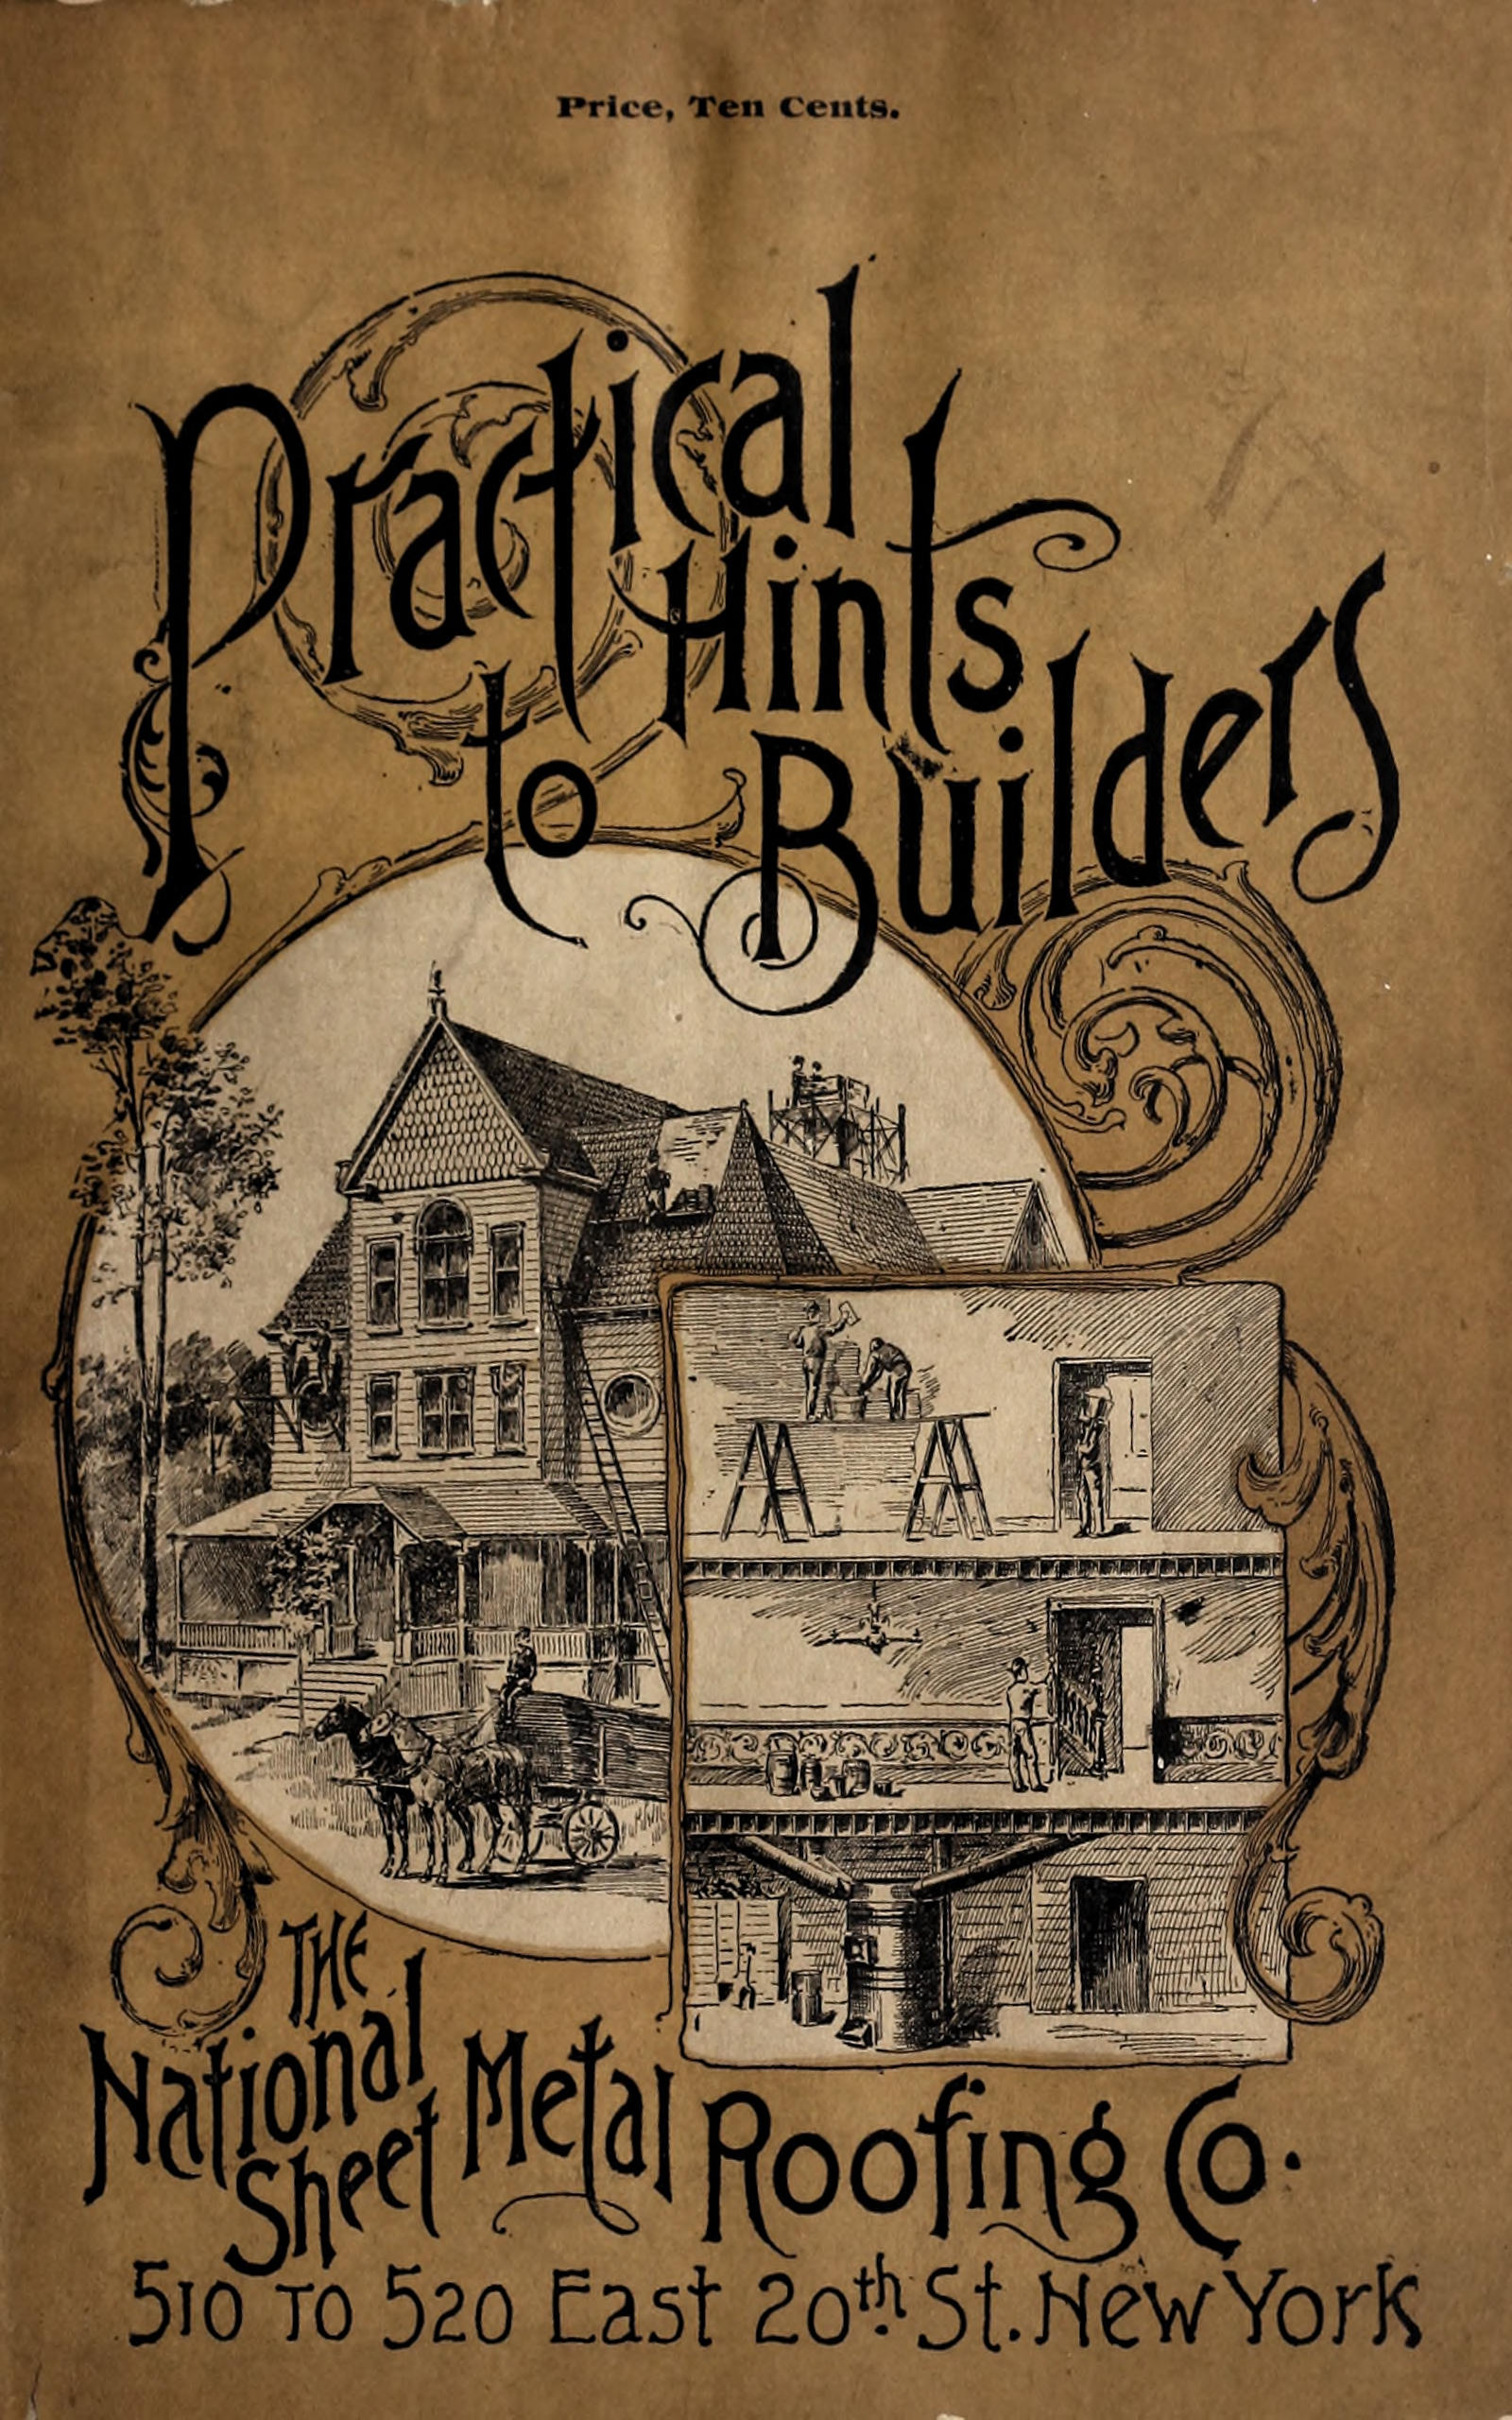 Practical hints to builders and those contemplating building&#10;Facts worth considering relating to foundation, cellar, kitchen, chimney, cistern, brick-work, mortar, heating, ventilation, the roof, and many items of interest to builders.